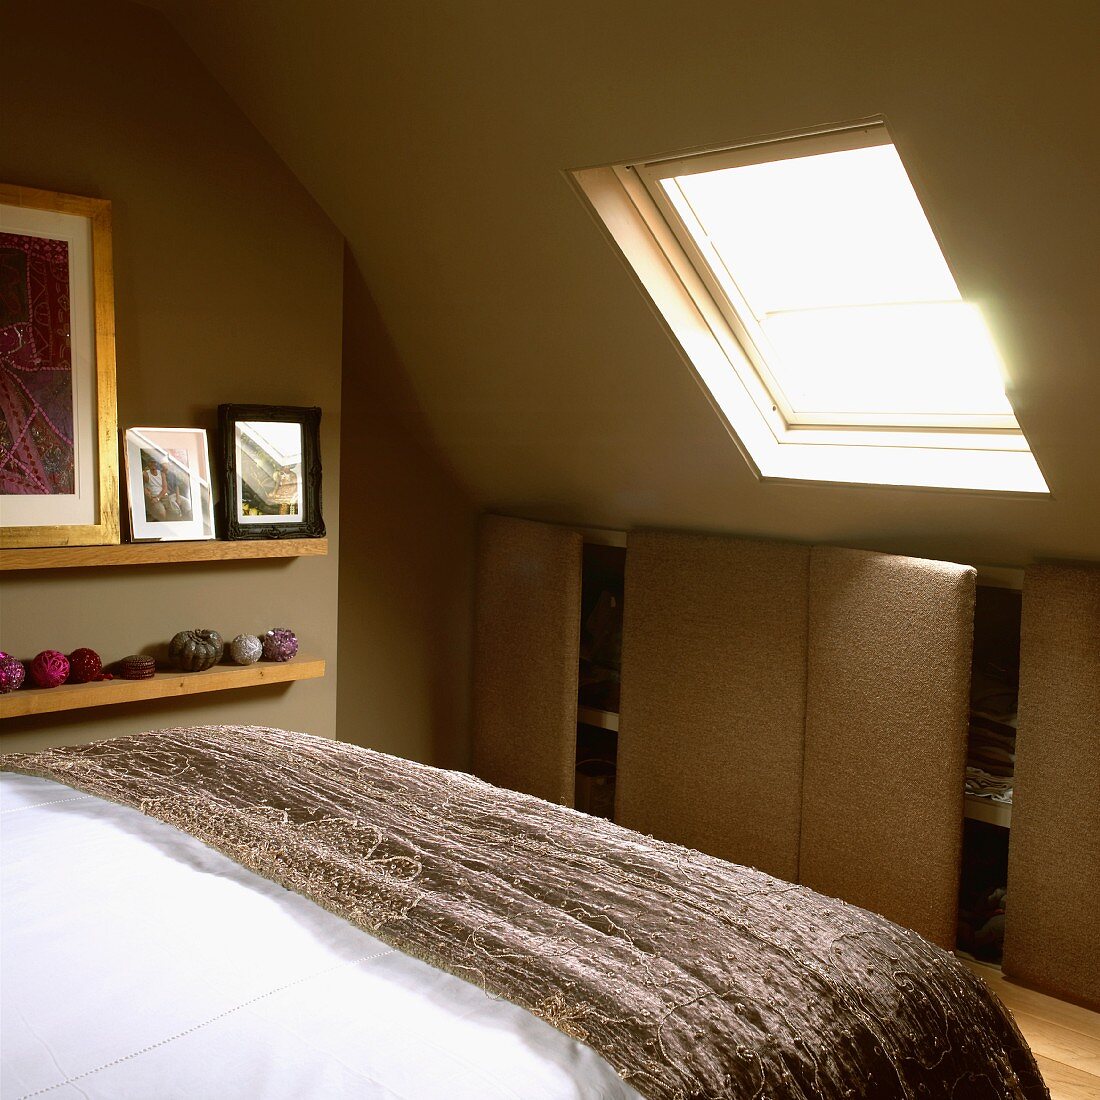 Attic bedroom with green walls, built in closet with upholstered doors, bed and skylight